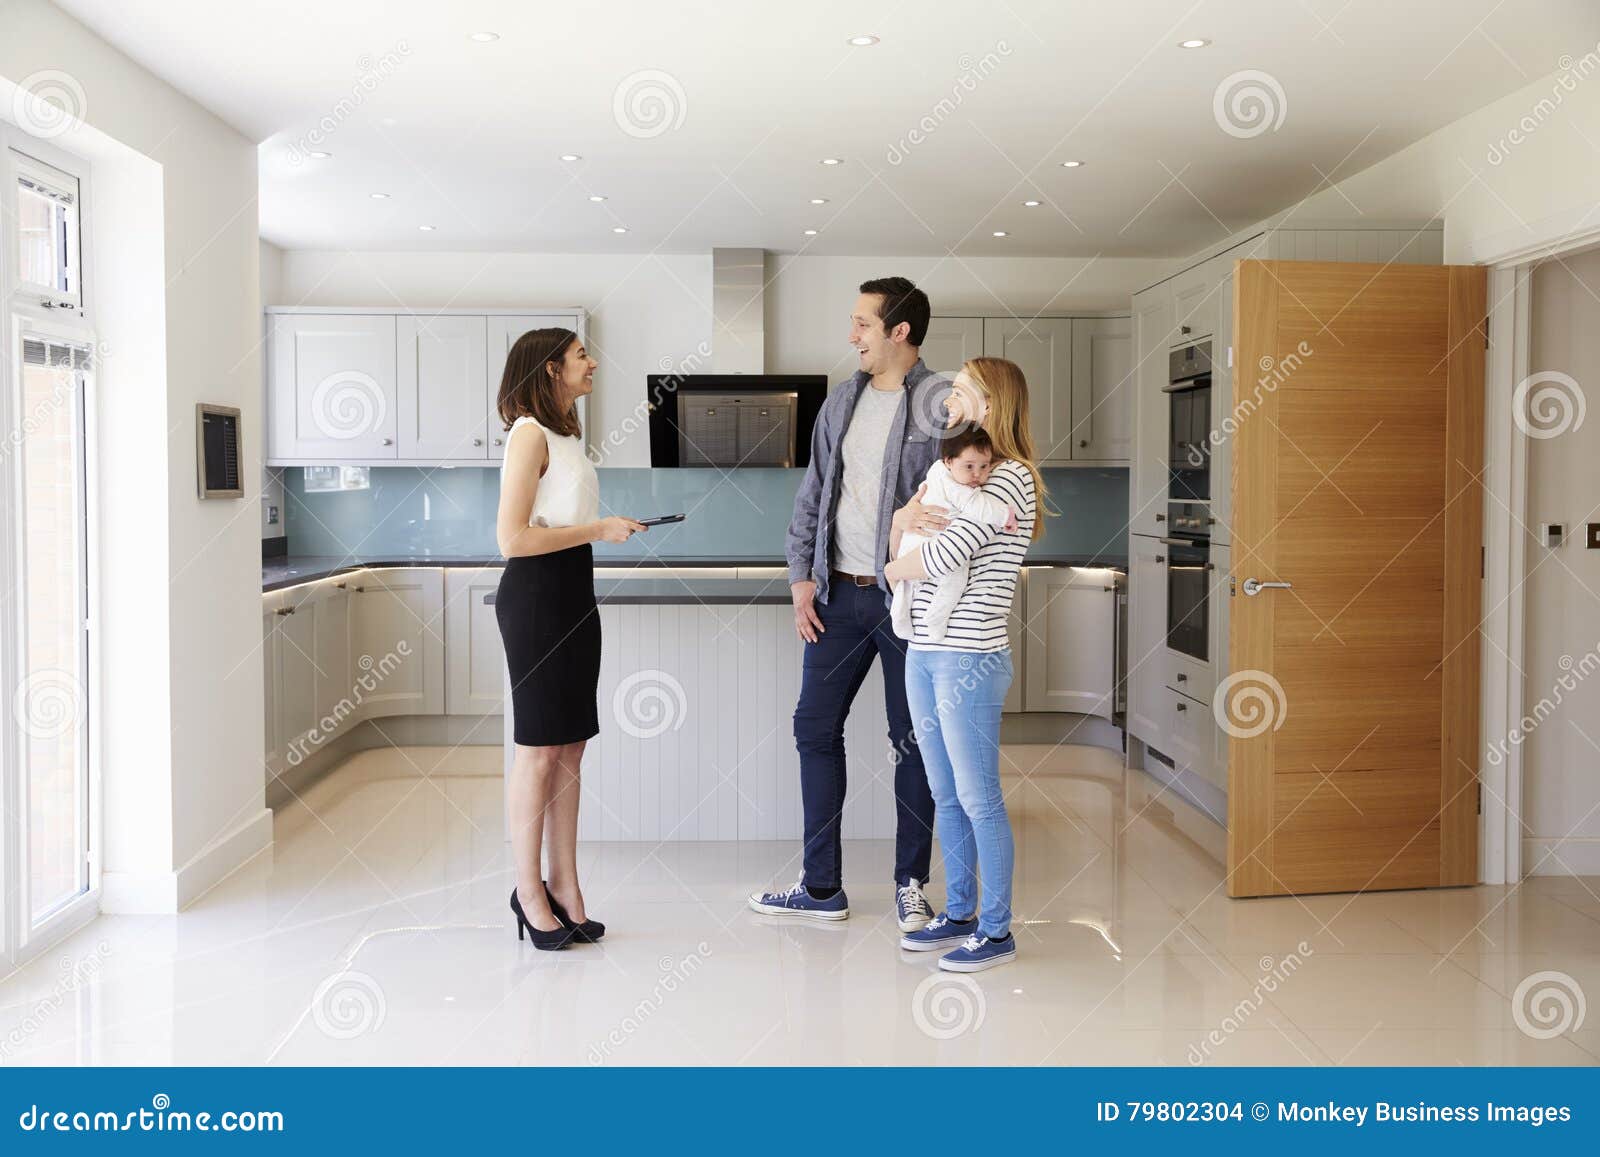 realtor showing young family around property for sale